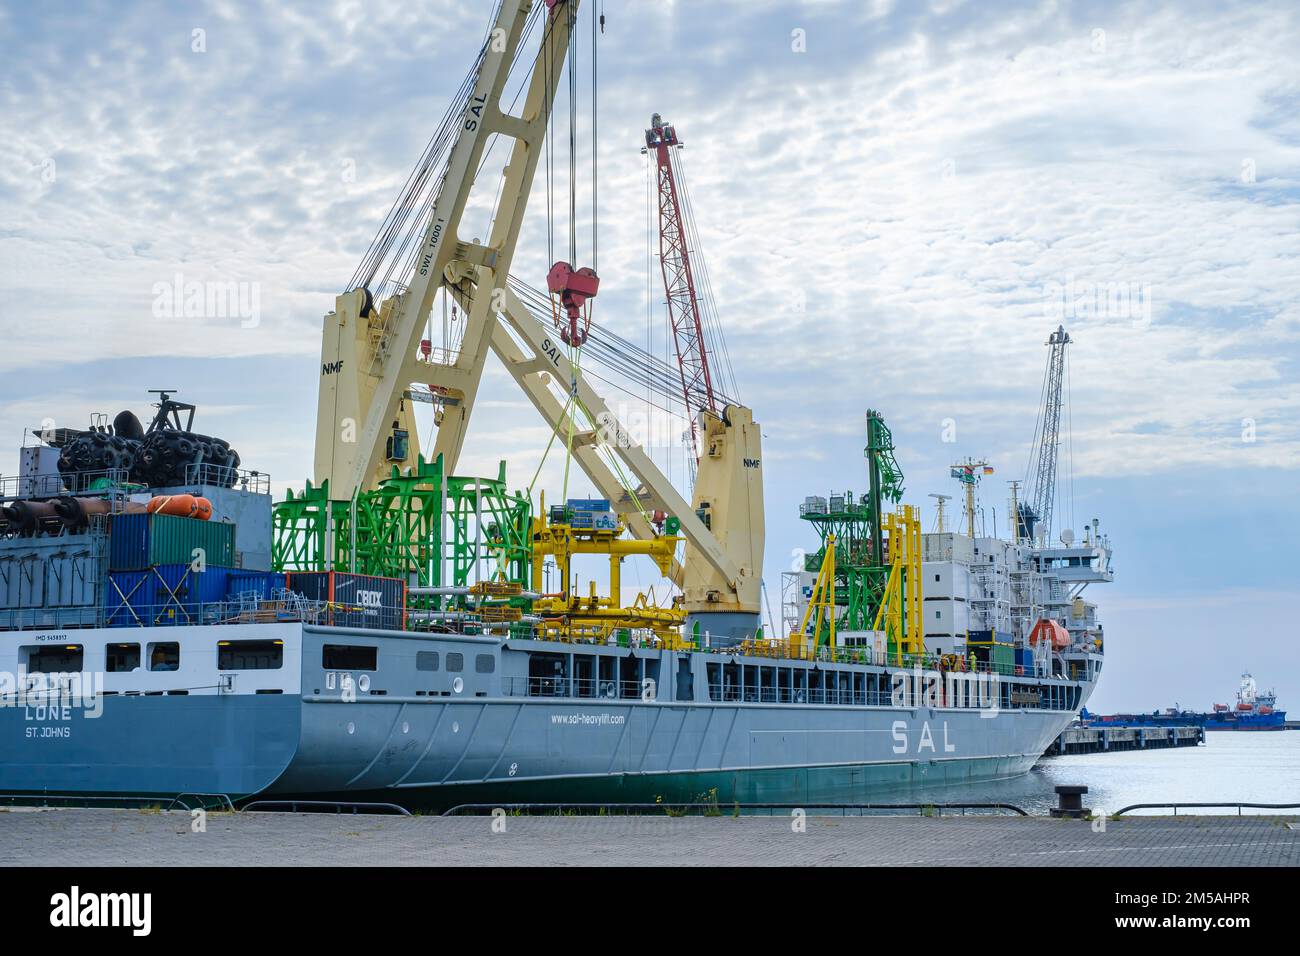 The heavy-lift ship LONE of the SAL Heavy Lift GmbH in the harbour of Mukran, Sassnitz, Mecklenburg-Western Pomerania, Germany, August 13, 2022. Stock Photo